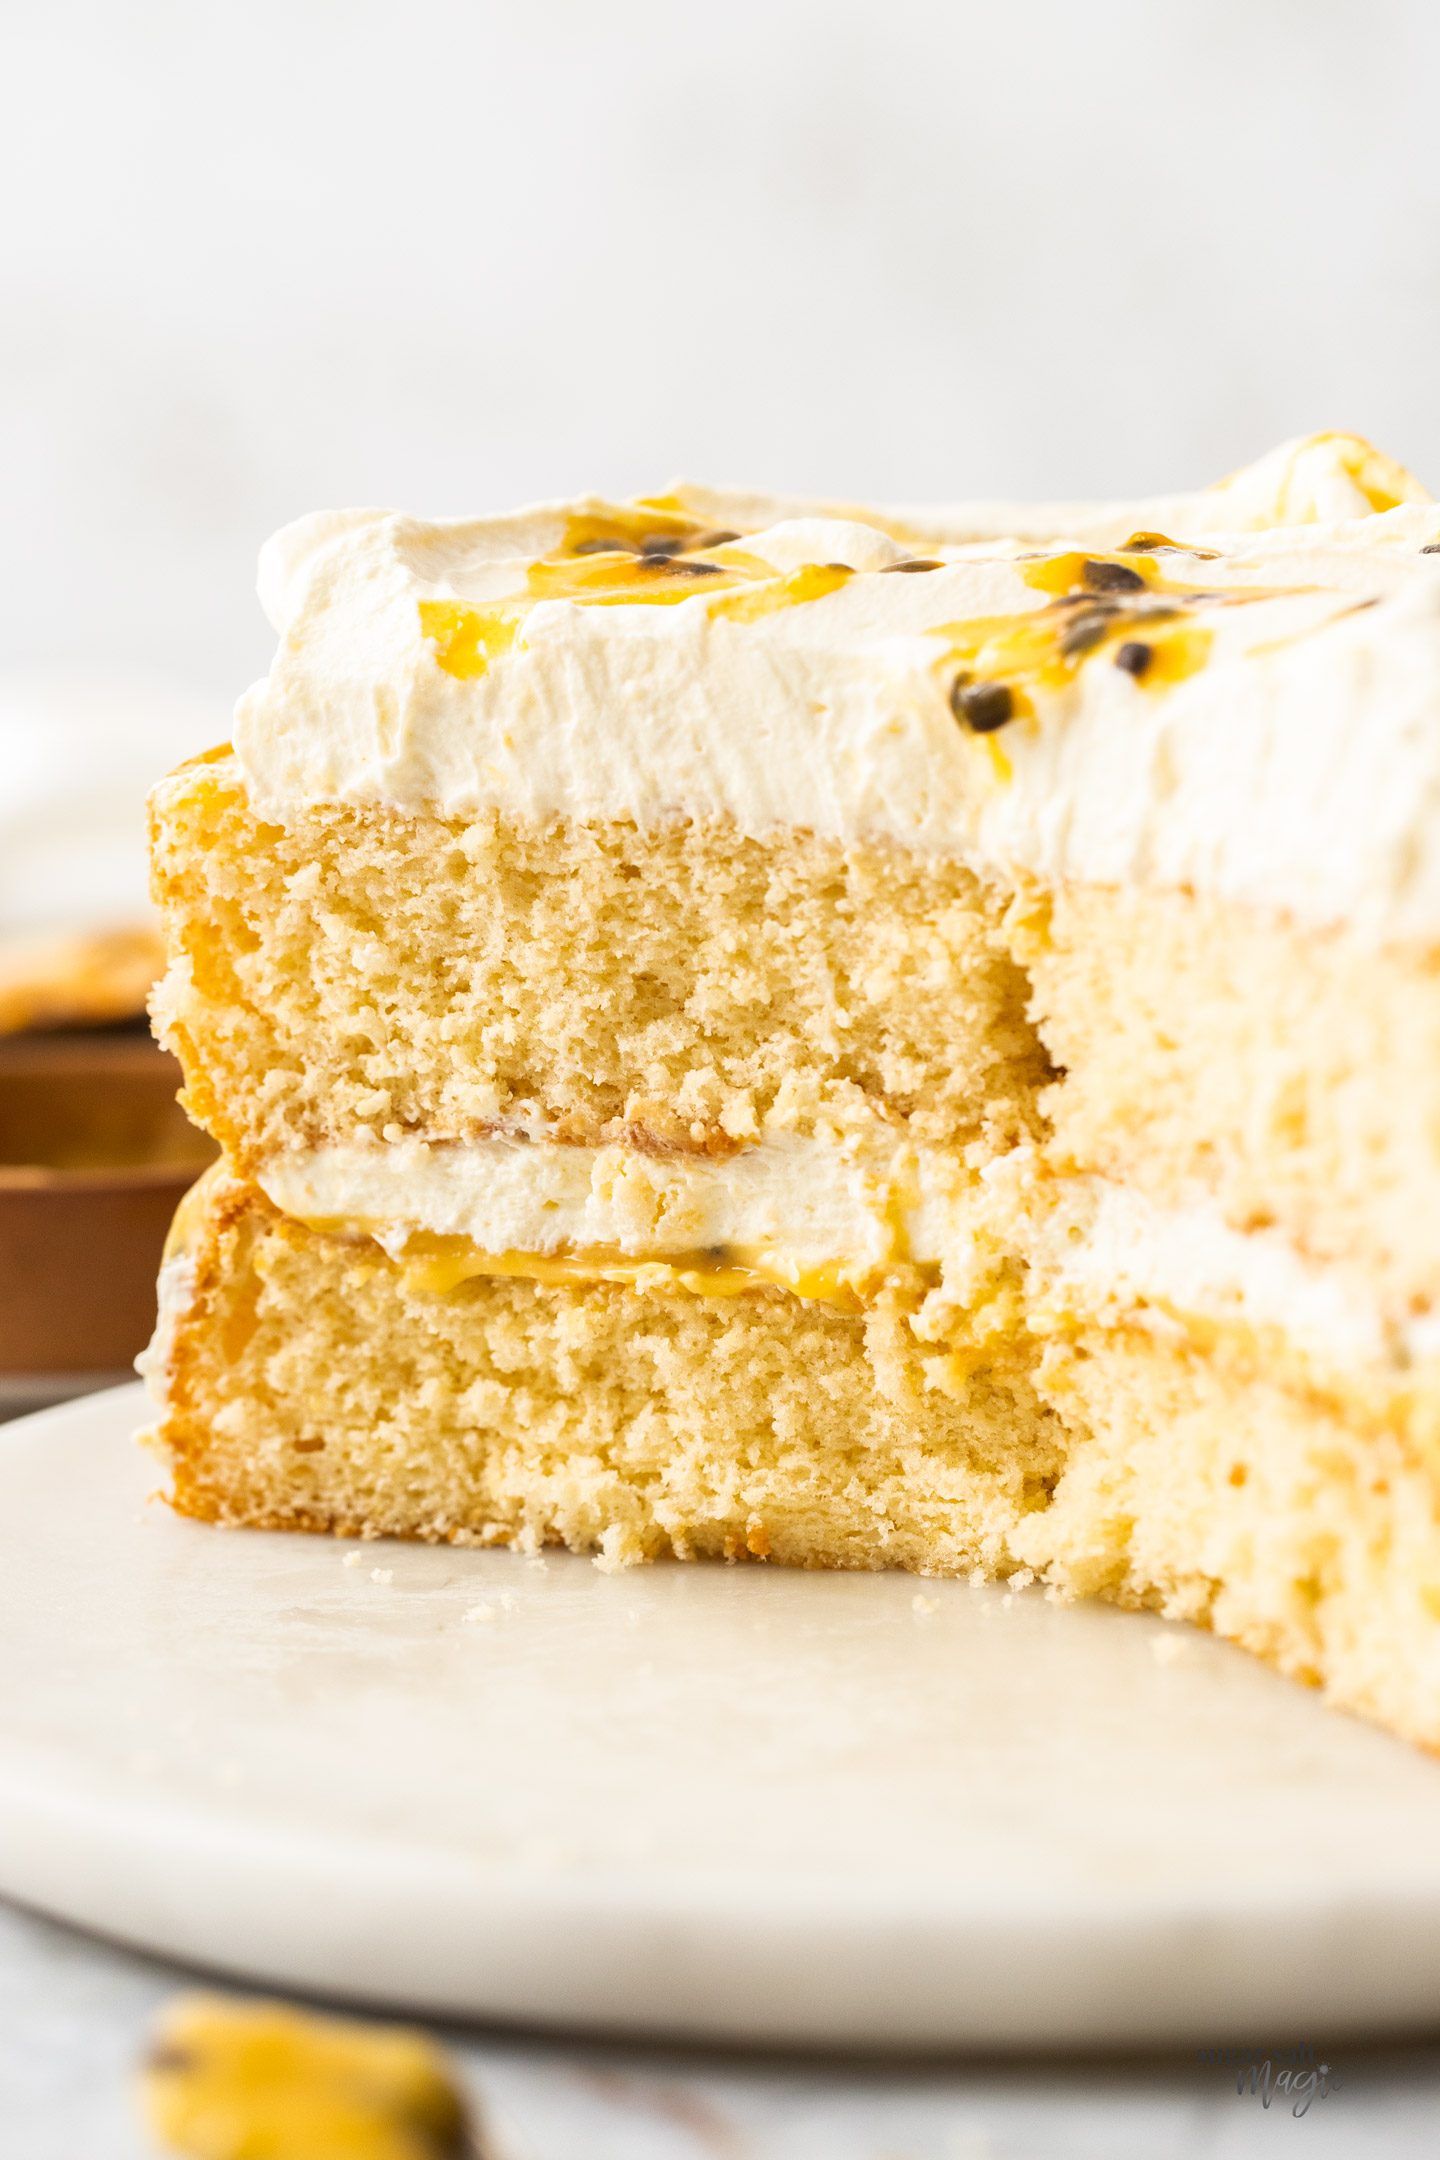 A passionfruit sponge cake, cut open to show the inside texture.